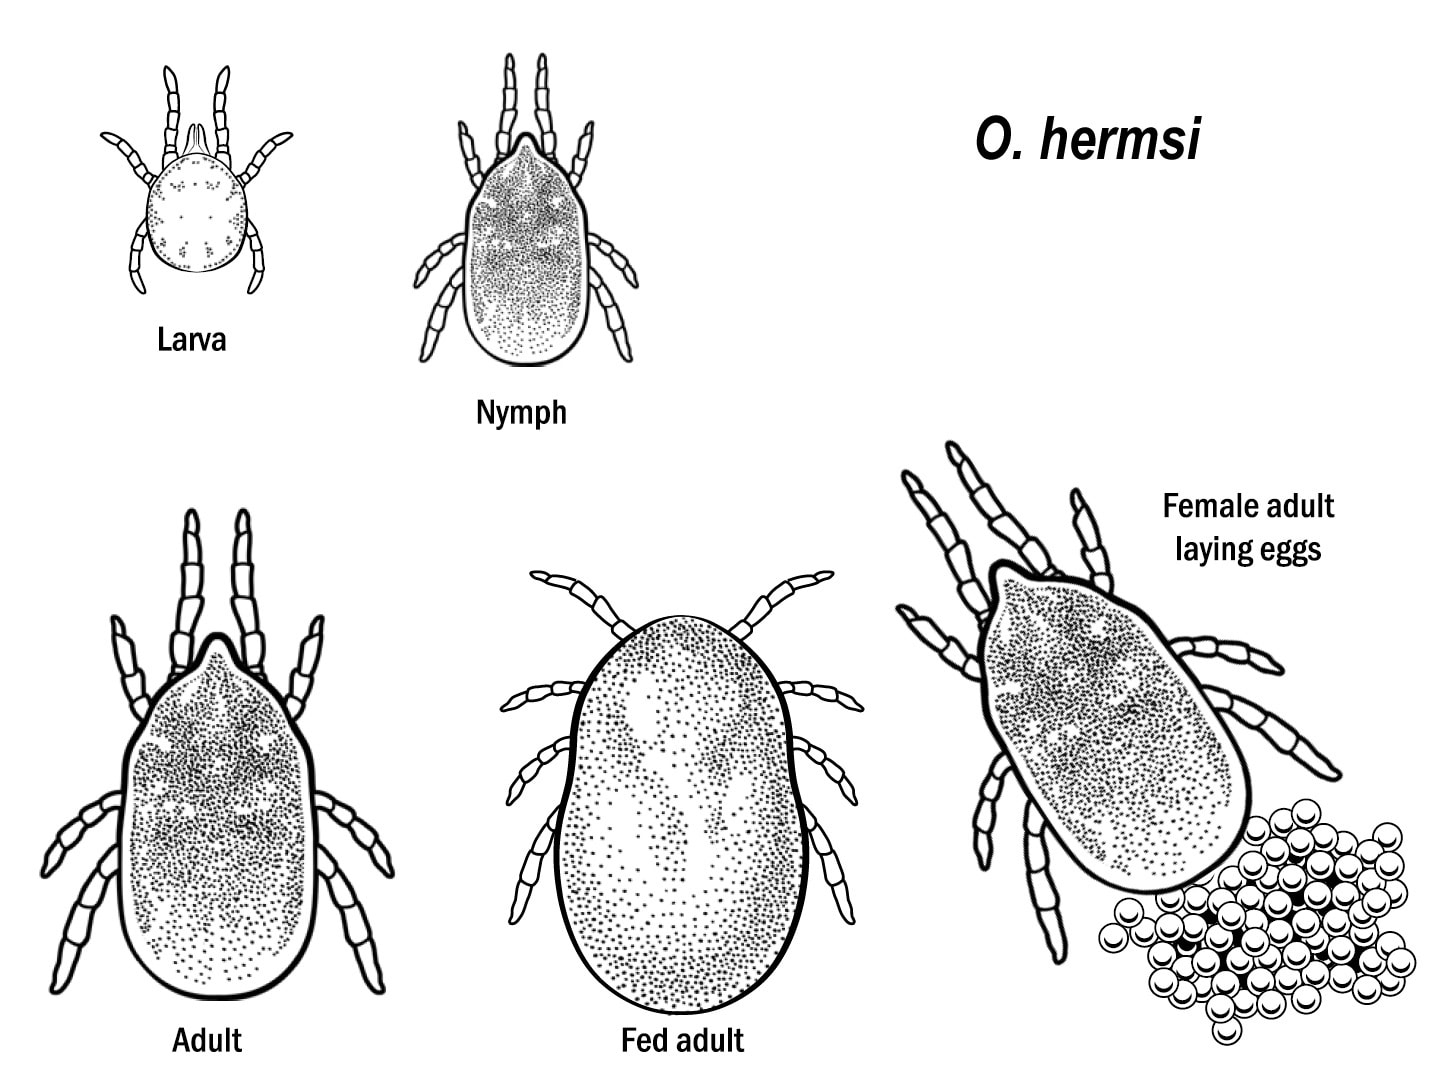 File:Tick (PSF).png - Wikimedia Commons